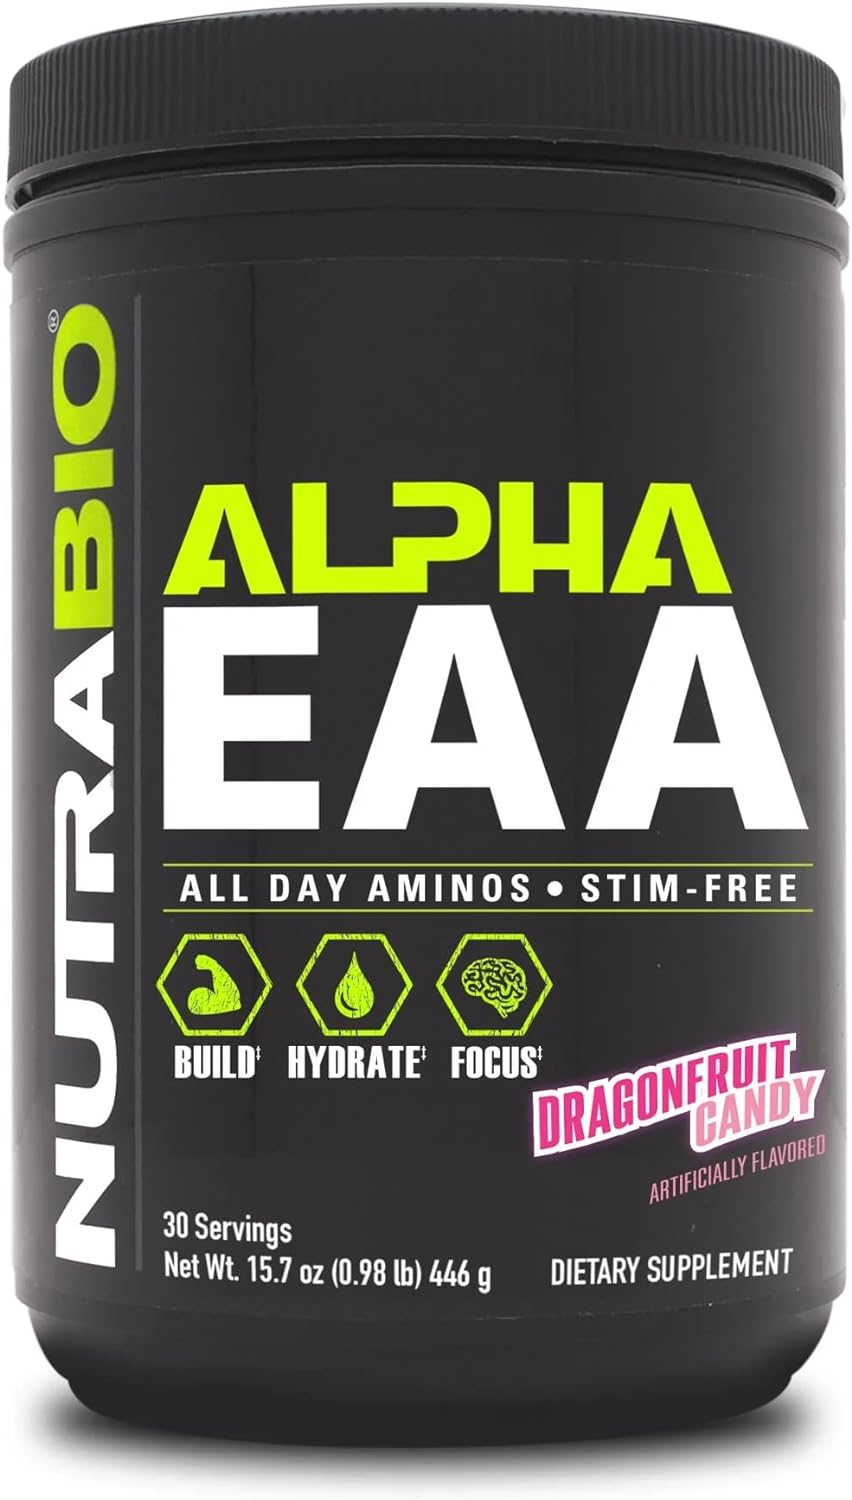 NutraBio Alpha EAA - All-Day Aminos - Recovery, Energy, Focus, and Hydration Supplement - Full Spectrum EAA BCAA Matrix, Electrolytes, Nootropics, Coconut Water - 30 Servings - Dragon Fruit